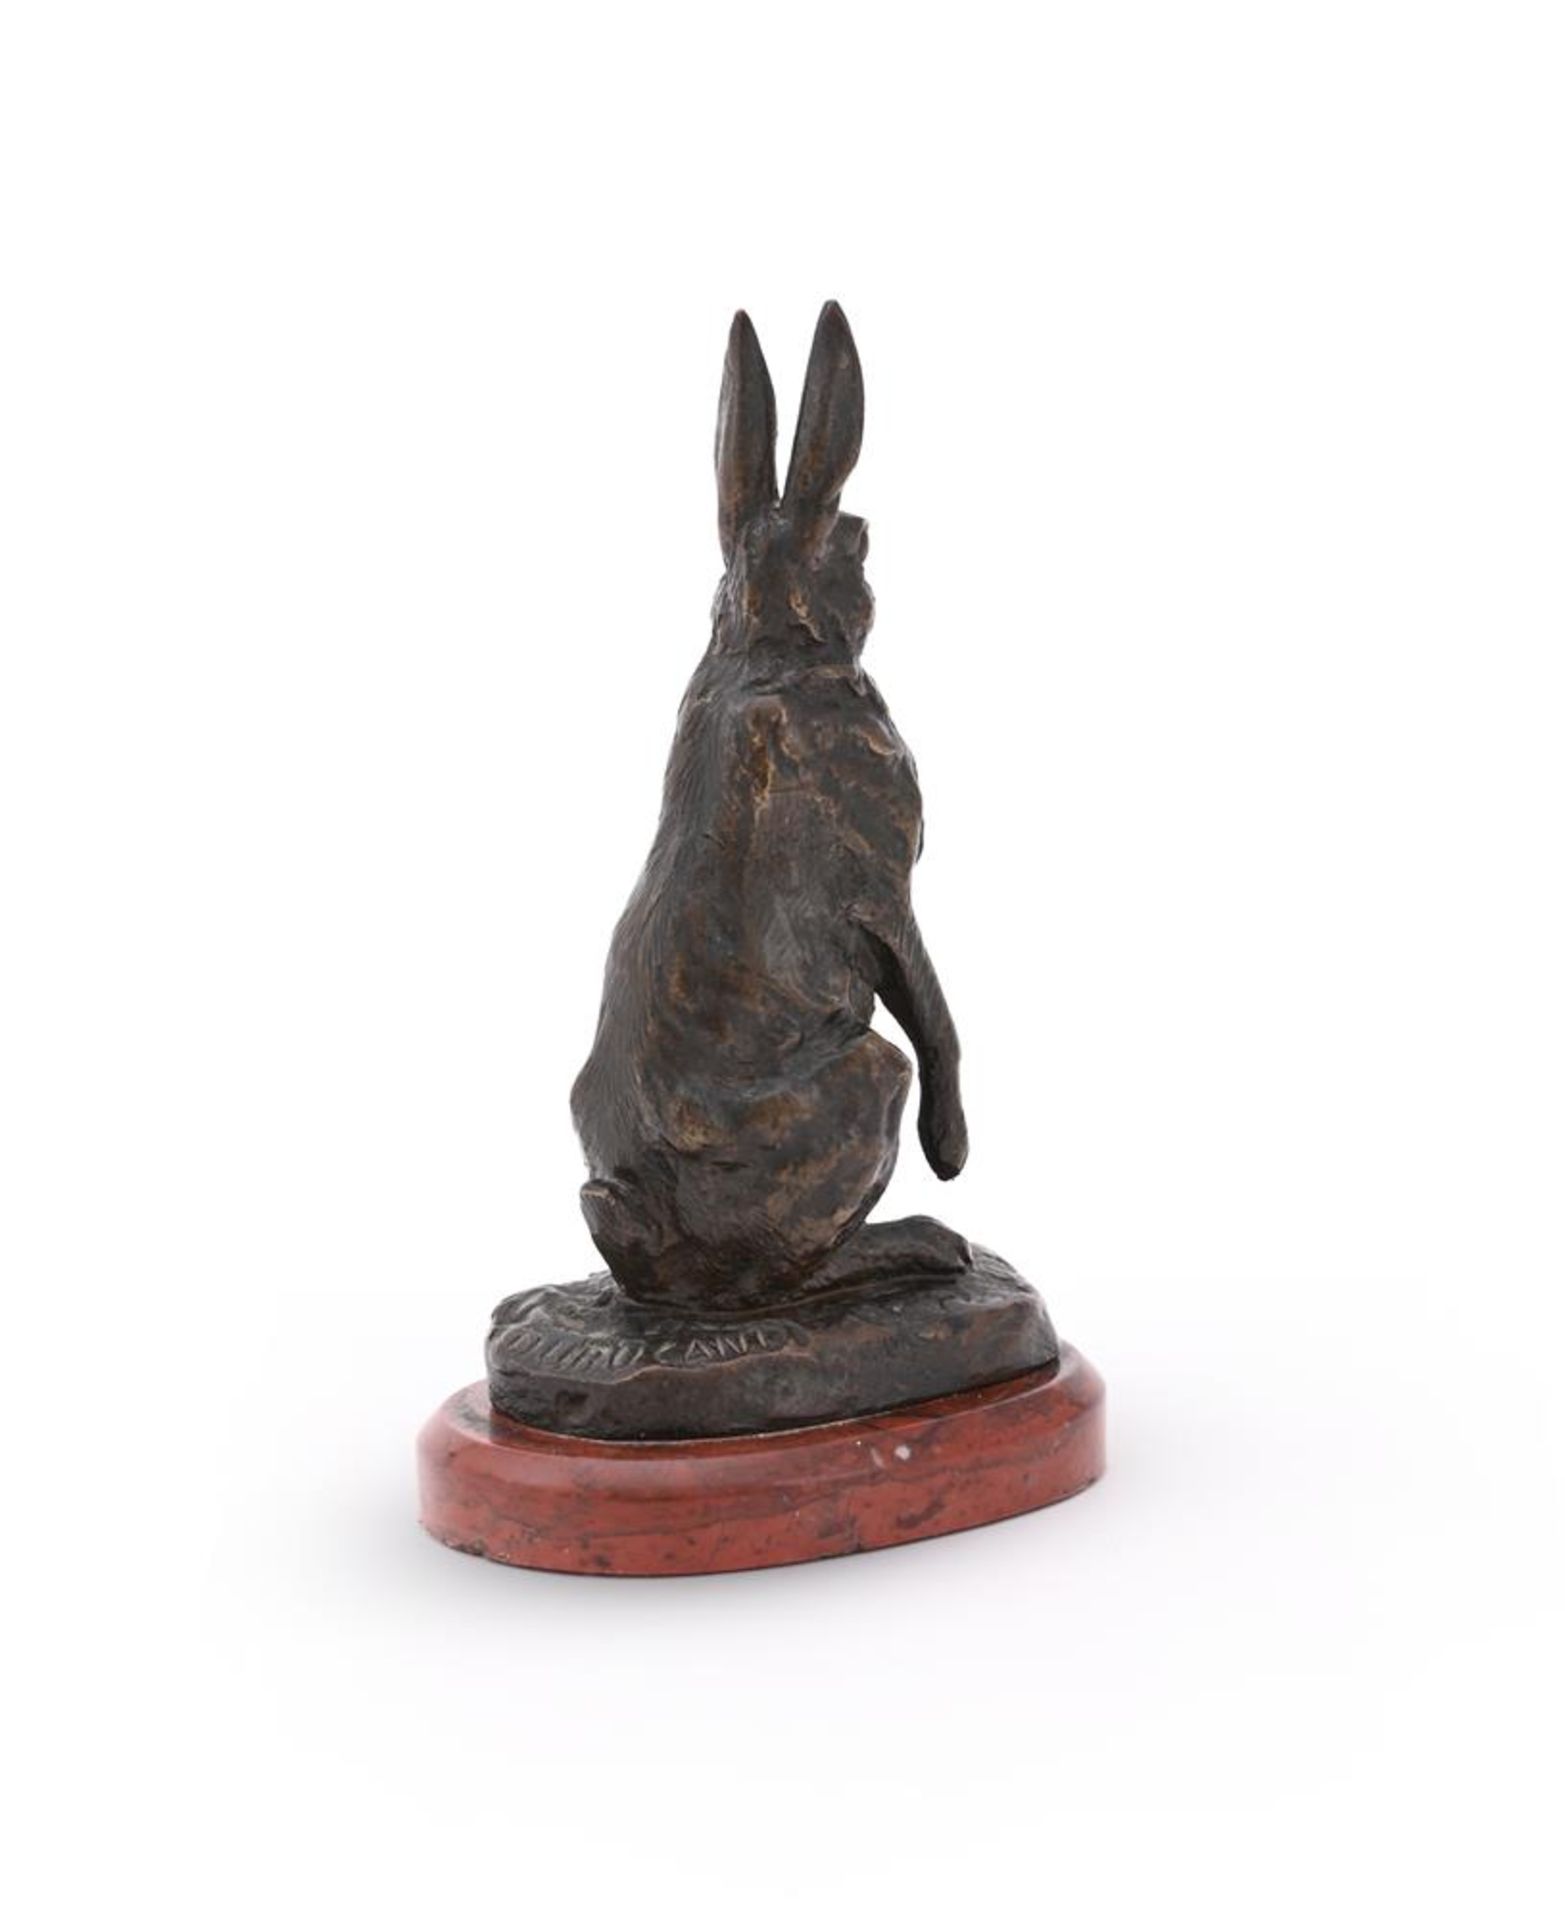 ALFRED DUBUCAND (FRENCH, 1828-1894), A BRONZE MODEL OF AN ALERT HARE - Image 2 of 6